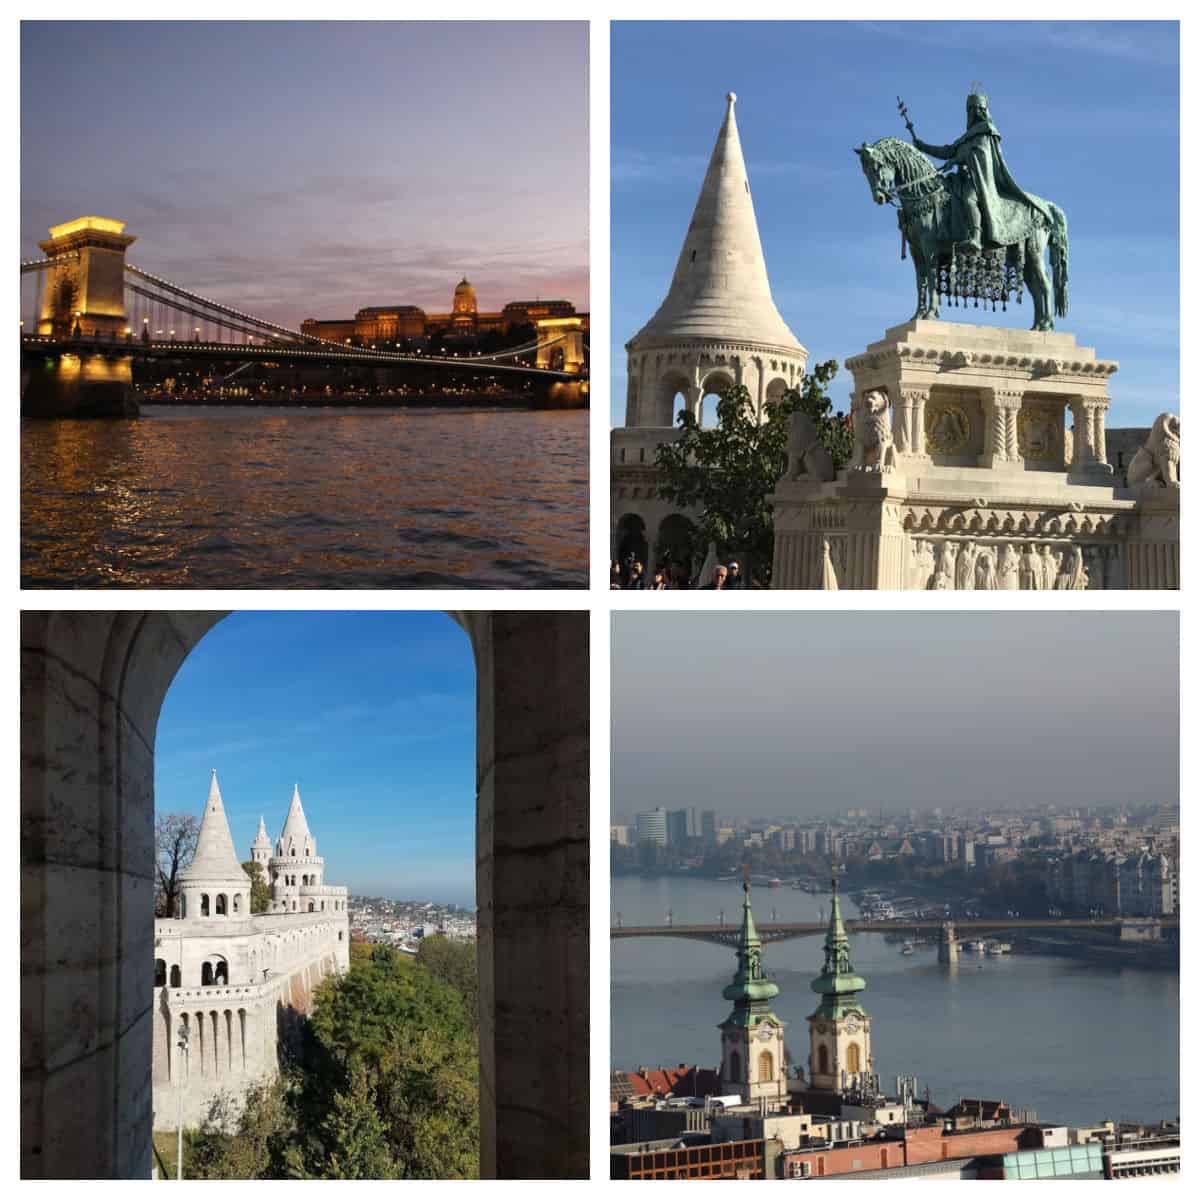 Sites in Budapest, Hungary.